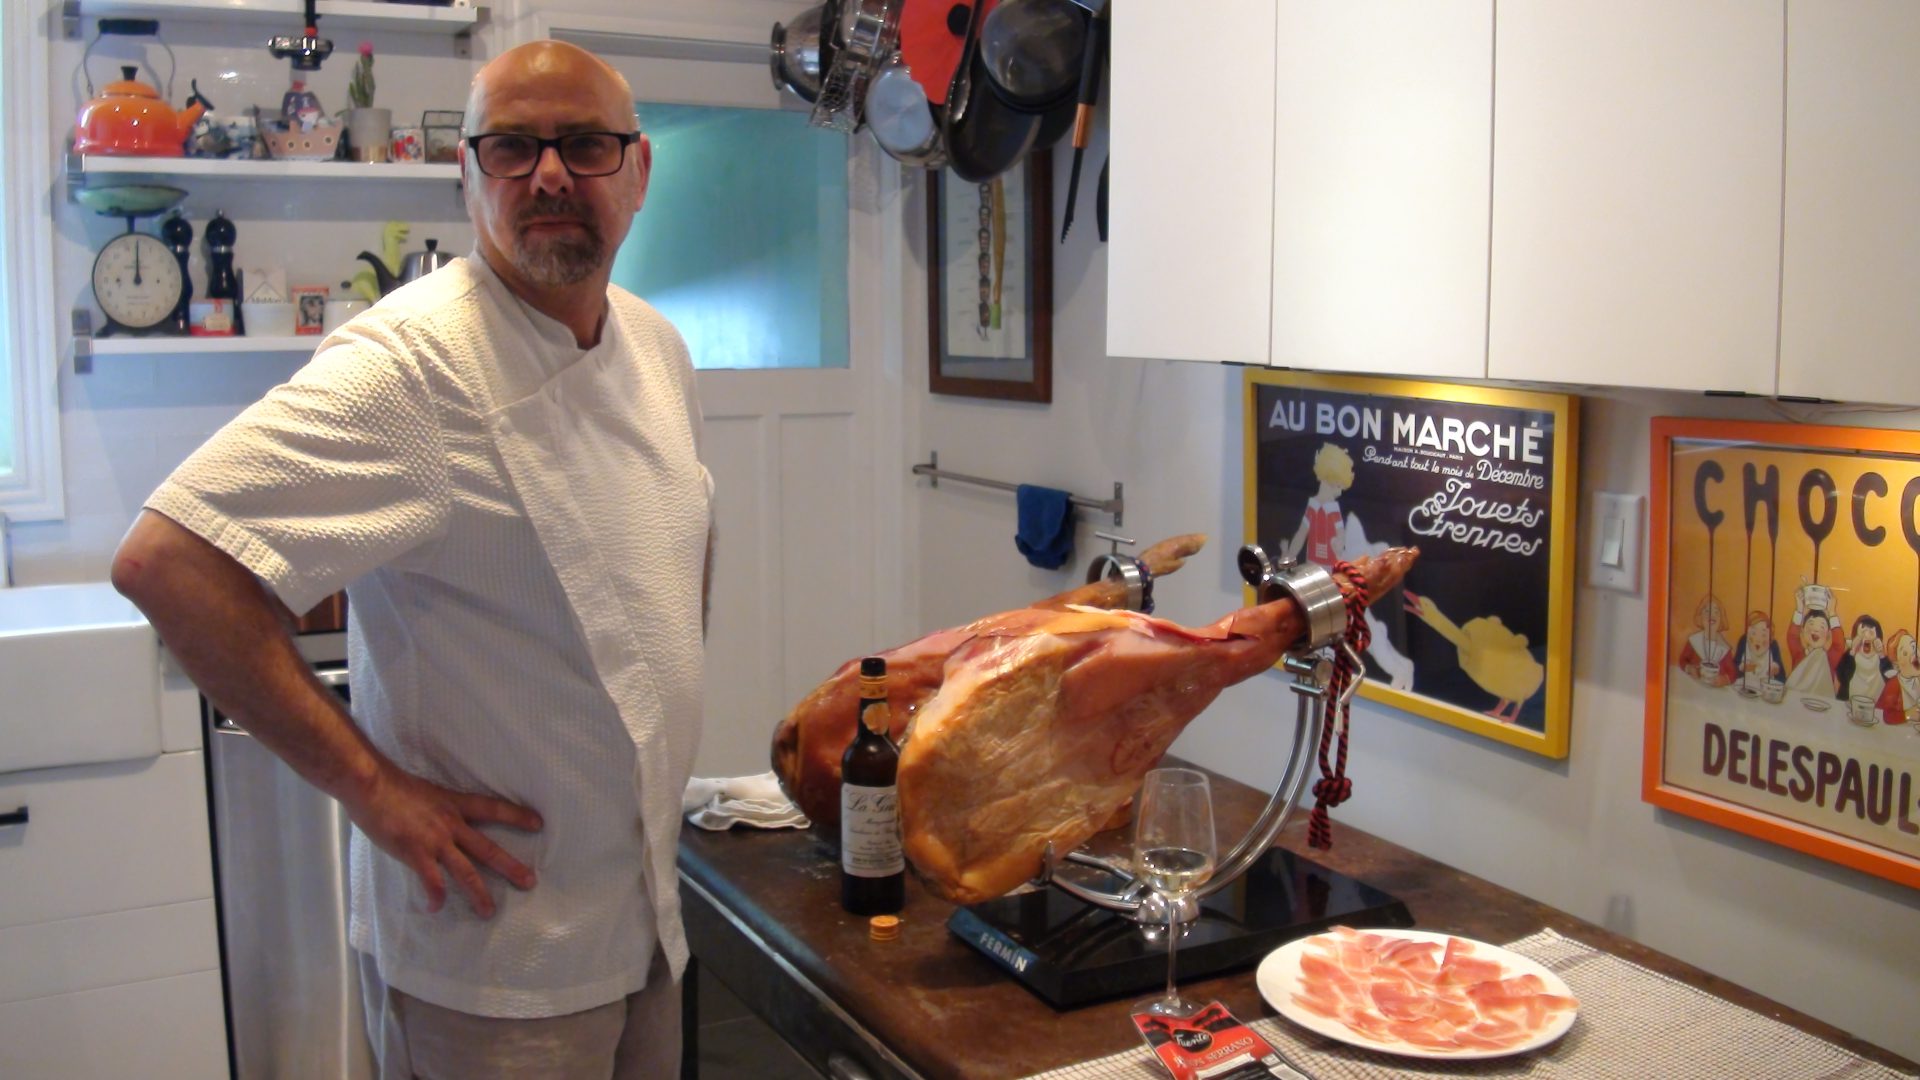 A gentleman who takes his jamón very seriously : Chef Chris McDonald shows us how to open and slice Spanish ham with the aid of the Wüsthof Classic Ikon Carving Knife and a bottle of utterly delicious Manzanilla Sherry.